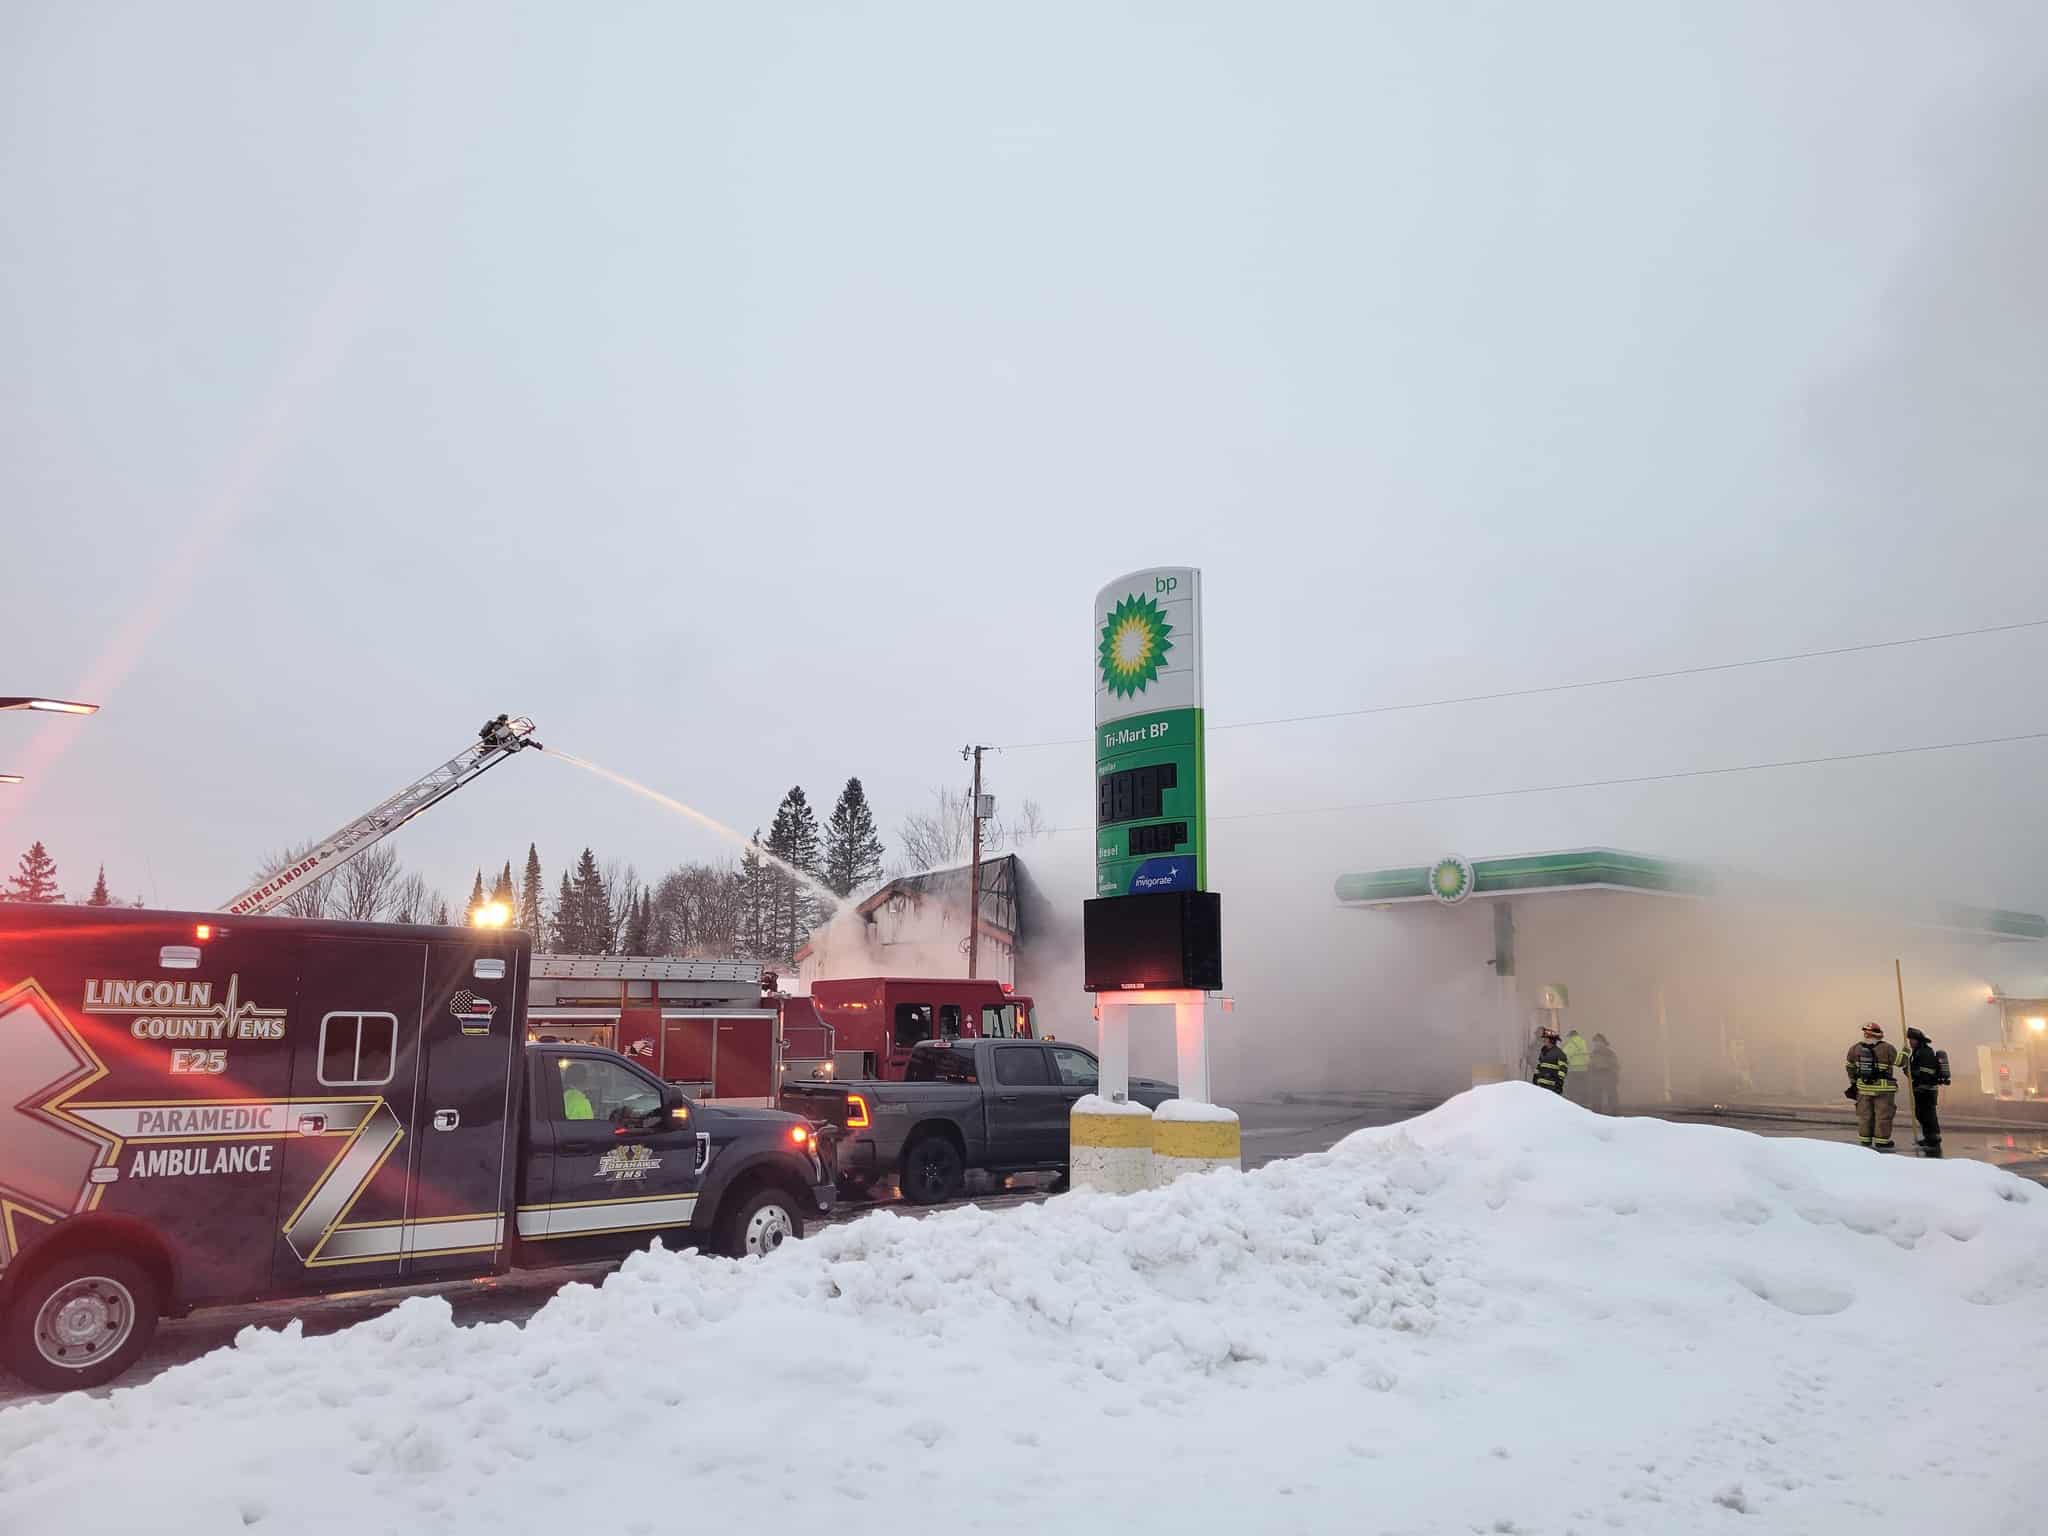 Tripoli BP gas station destroyed in fire